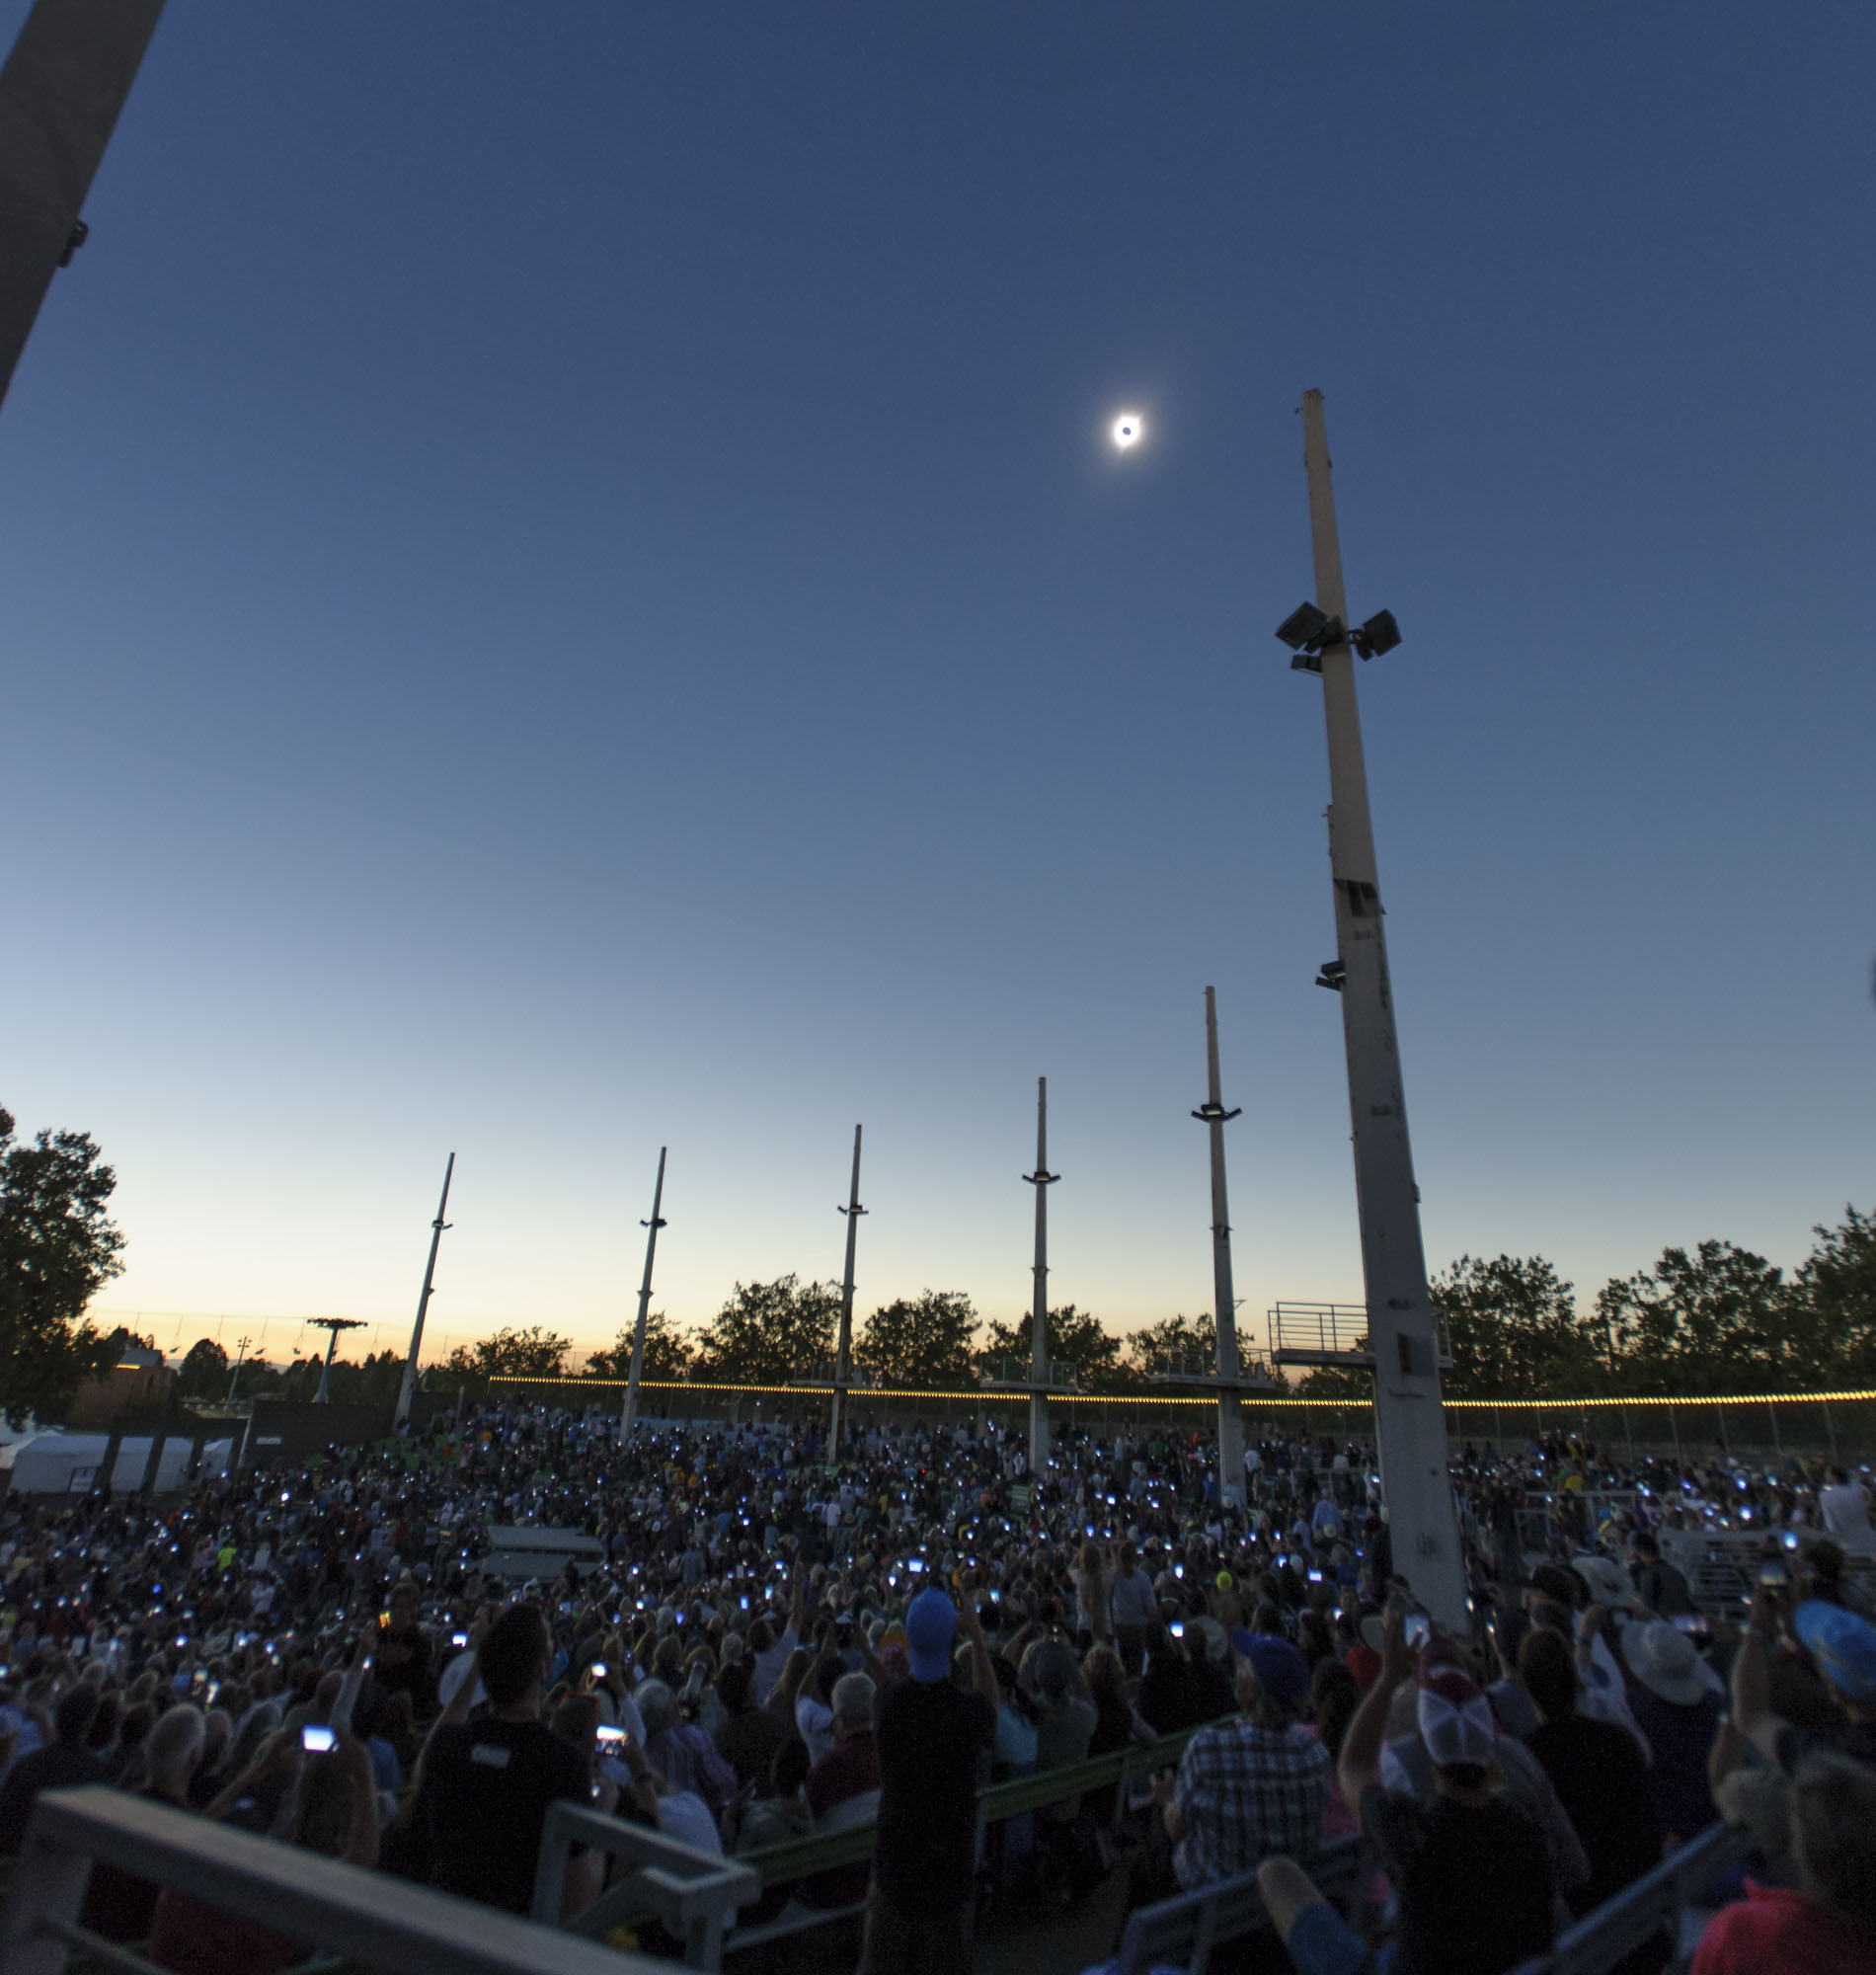 2017 Solar Eclipse totality as seen by the people attending the viewing event at the Oregon State Fairgrounds, Salem, Oregon.